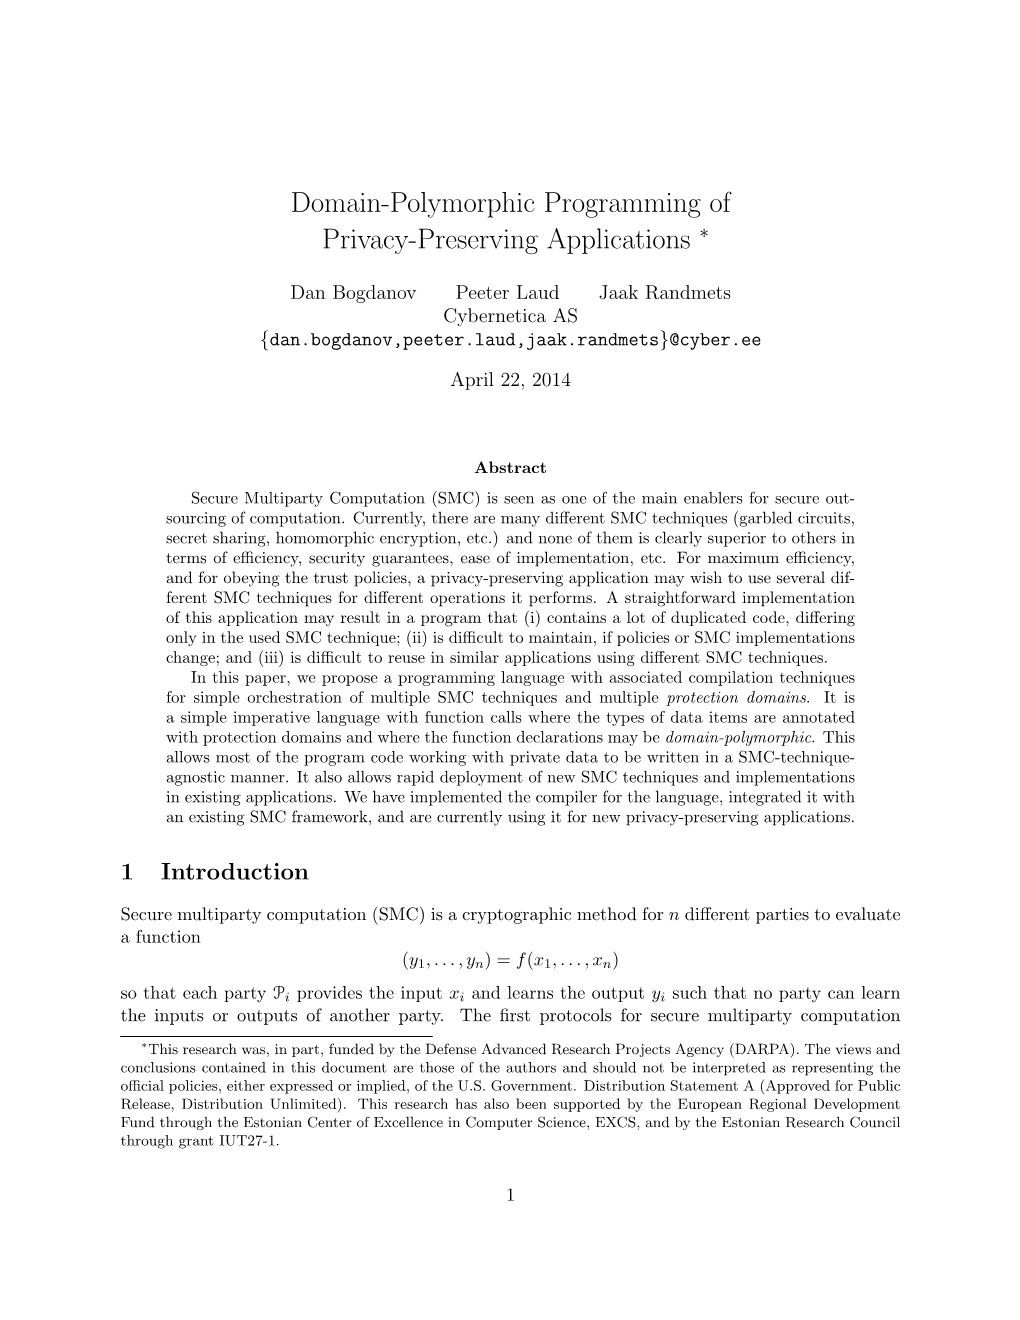 Domain-Polymorphic Programming of Privacy-Preserving Applications ∗